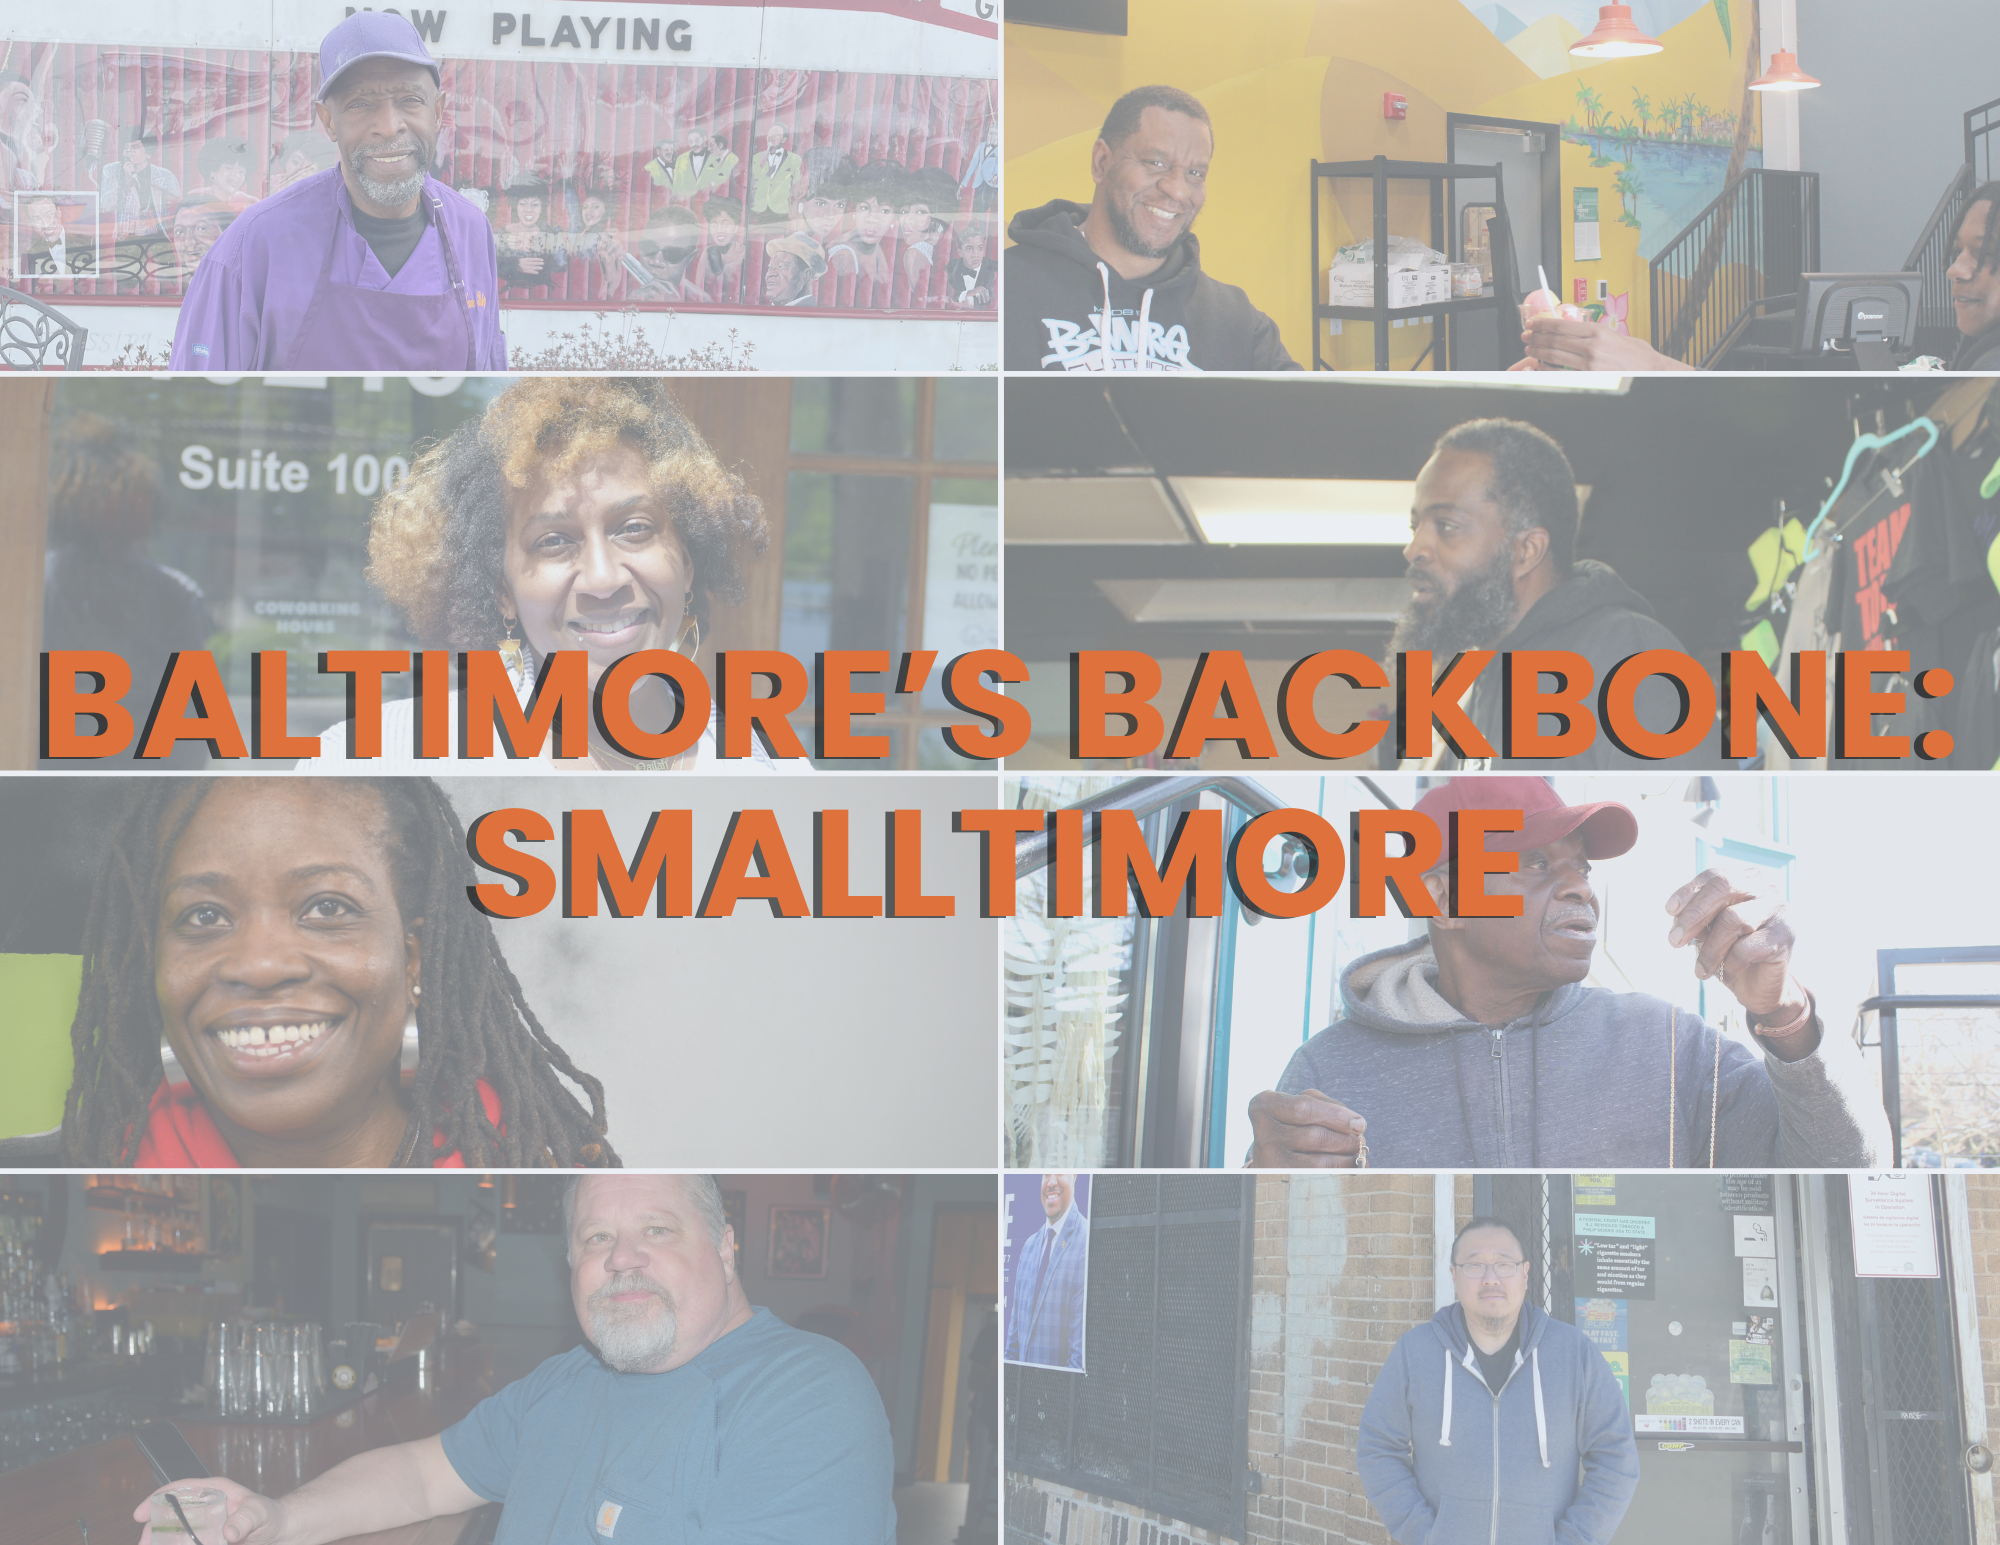 Images of Baltimore small business owners